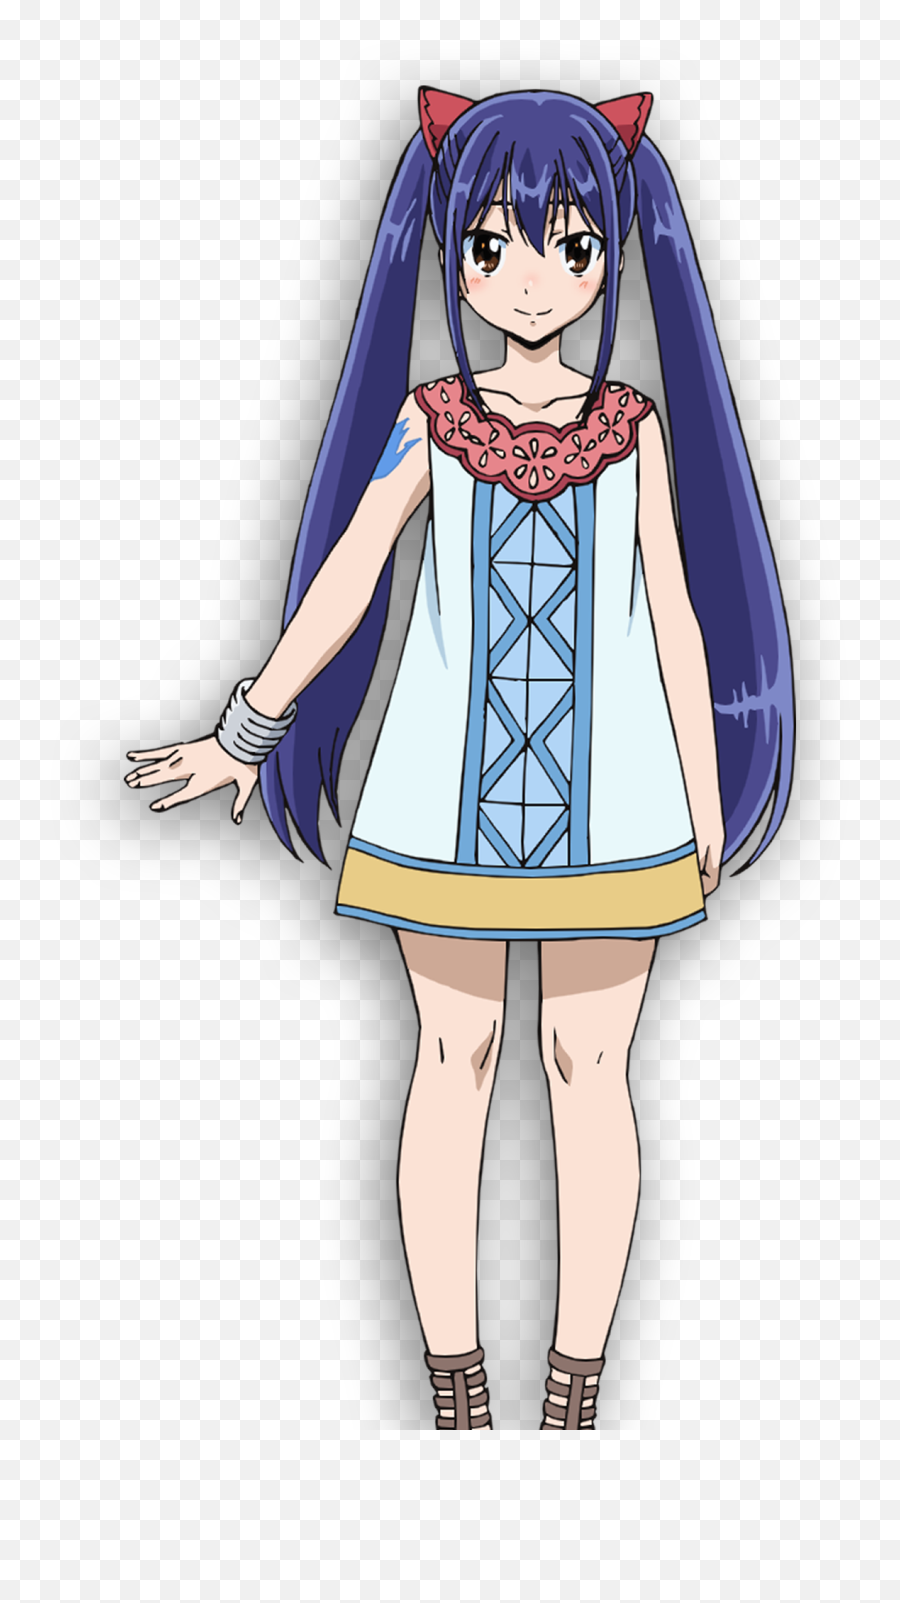 Wendy Fairy Tail Png 8 Image - Fairy Tail Dragon Cry Wendy Marvelle,Fairy Tail Transparent